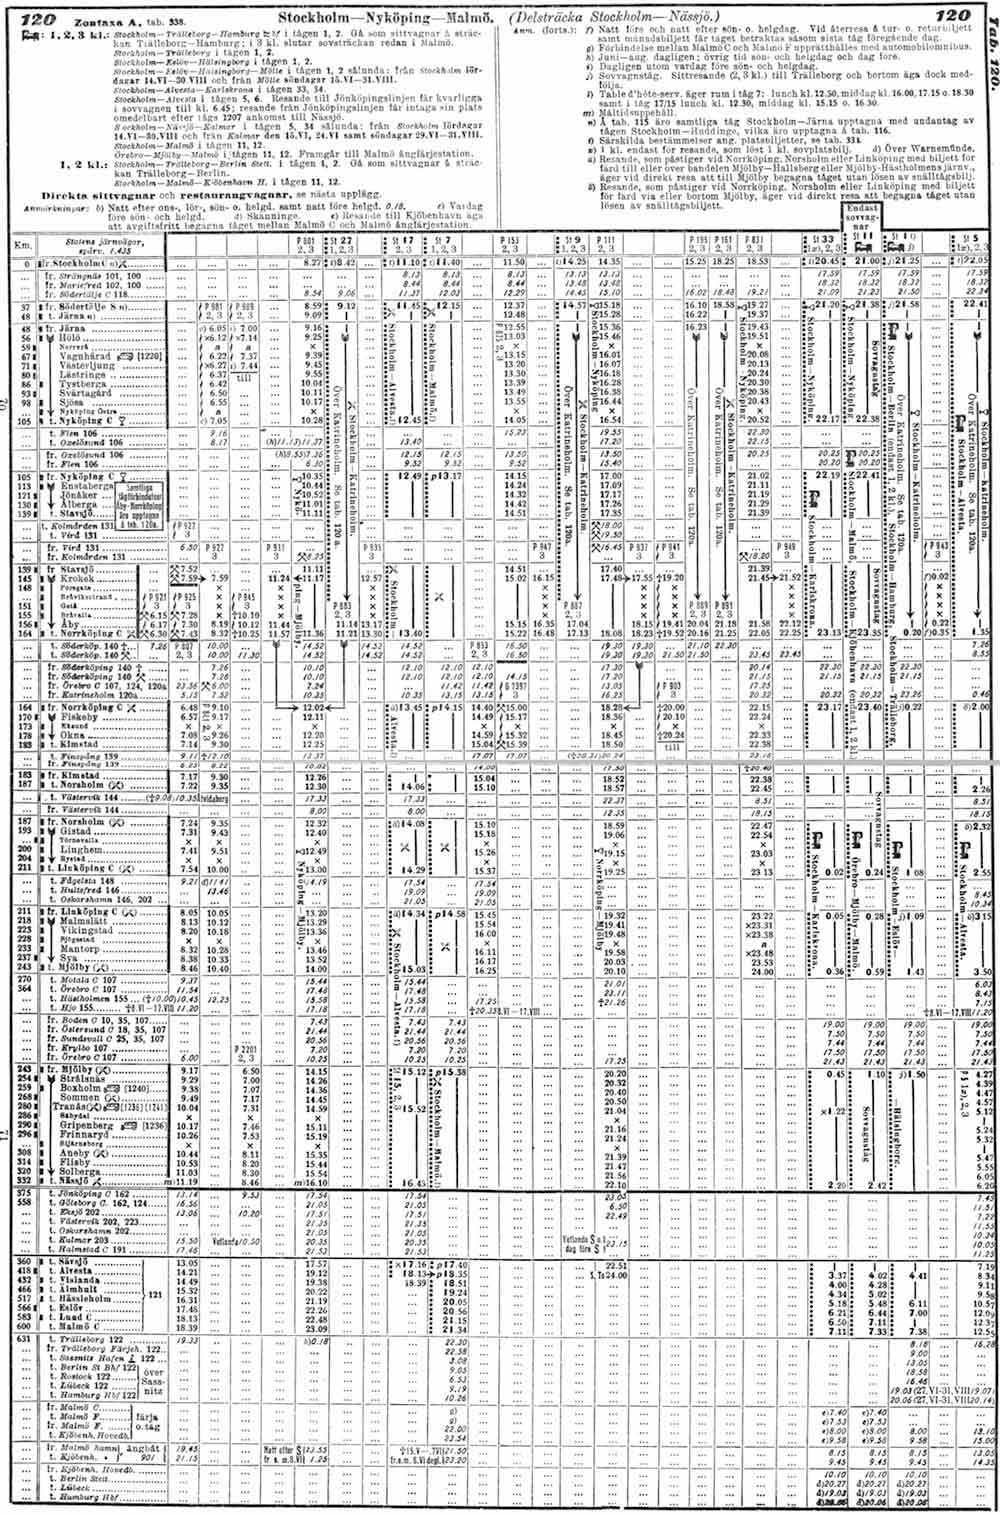 Timetable 1930 Statsbanan Jrna - Nykping - by - (Norrkping)